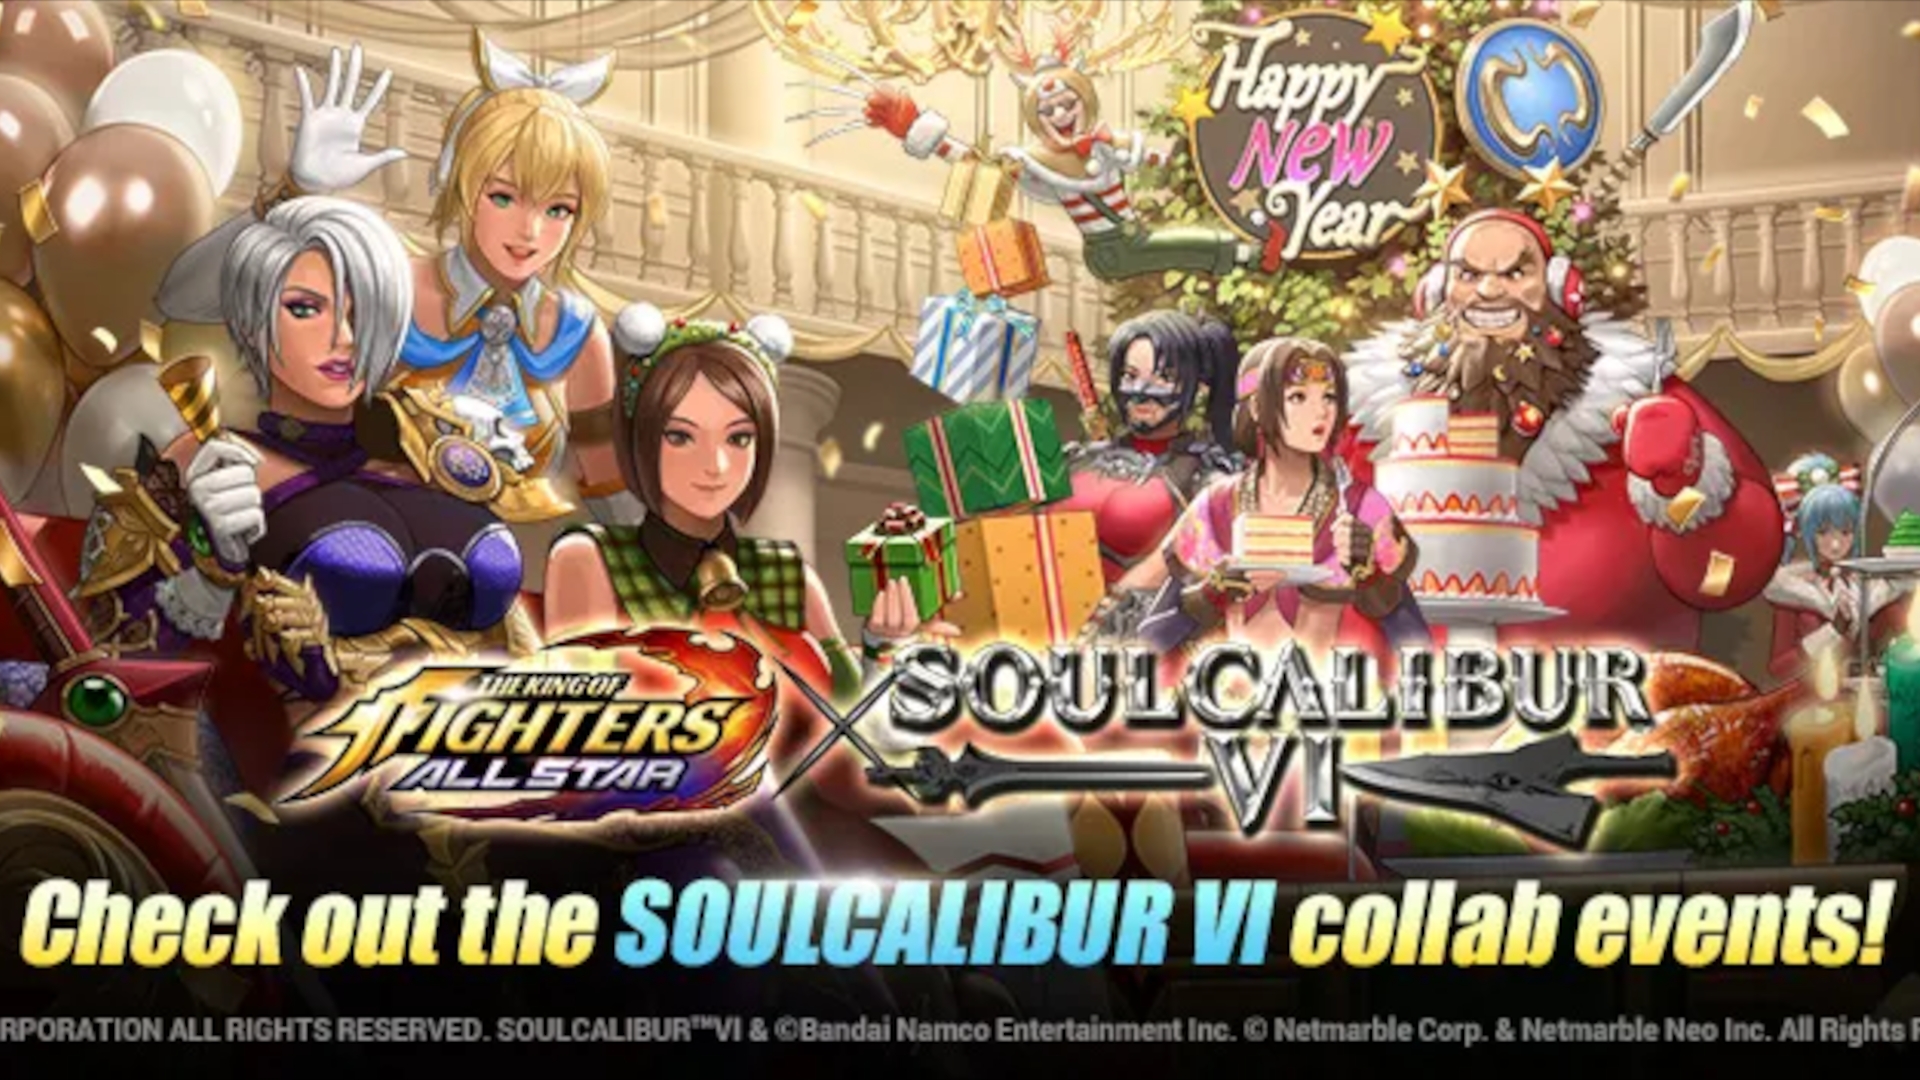 The King of Fighters AllStar Coupon Codes (December 2023)